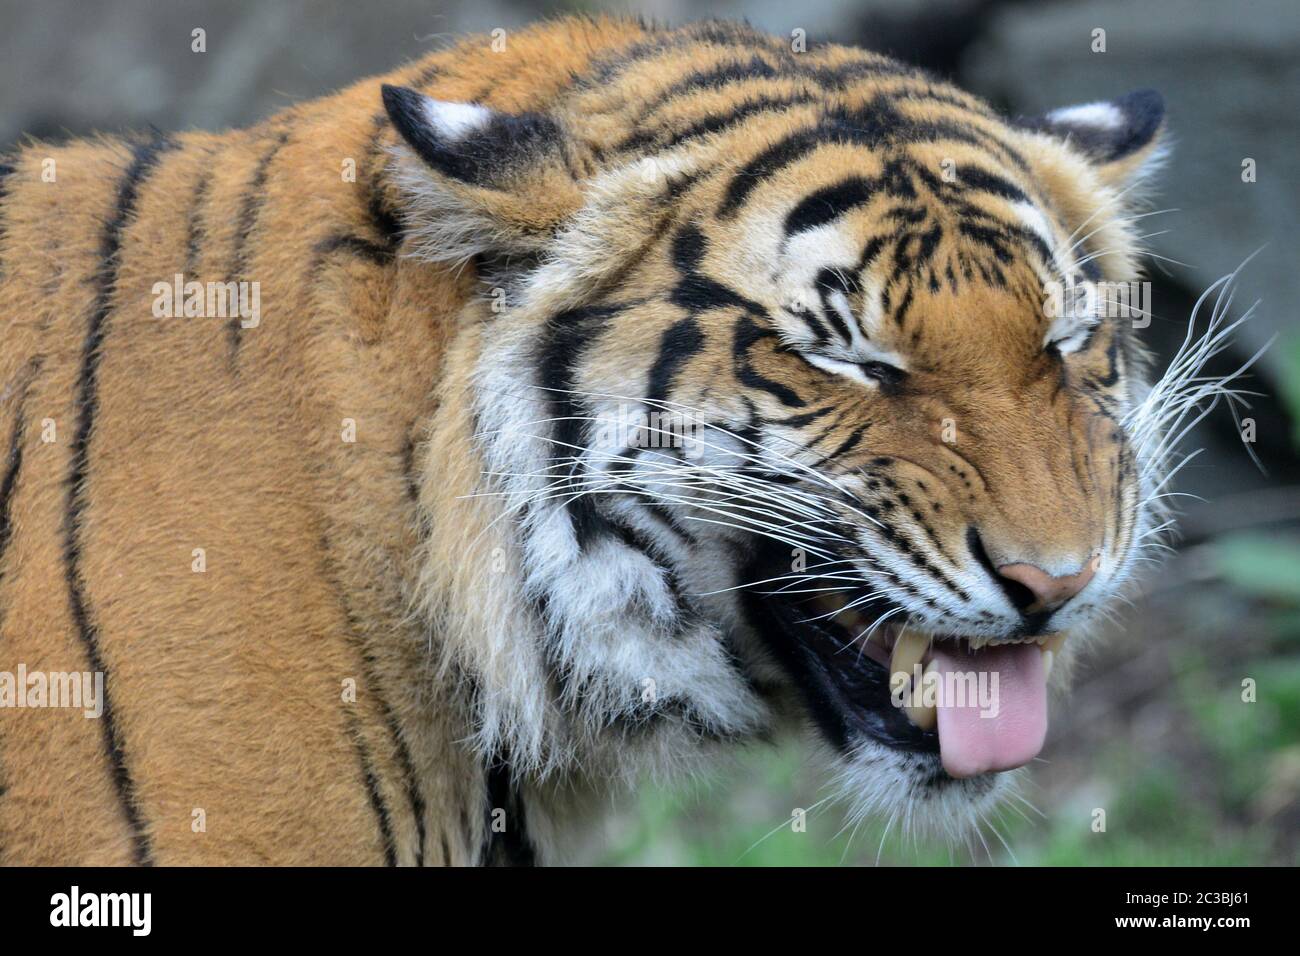 Usti Nad Labem, Czech Republic. 19th June, 2020. Two years old Malayan  tiger called Bulan yawns inside its enclosure at the Usti nad Labem Zoo.  Male Bulan born at Prague Zoo. In